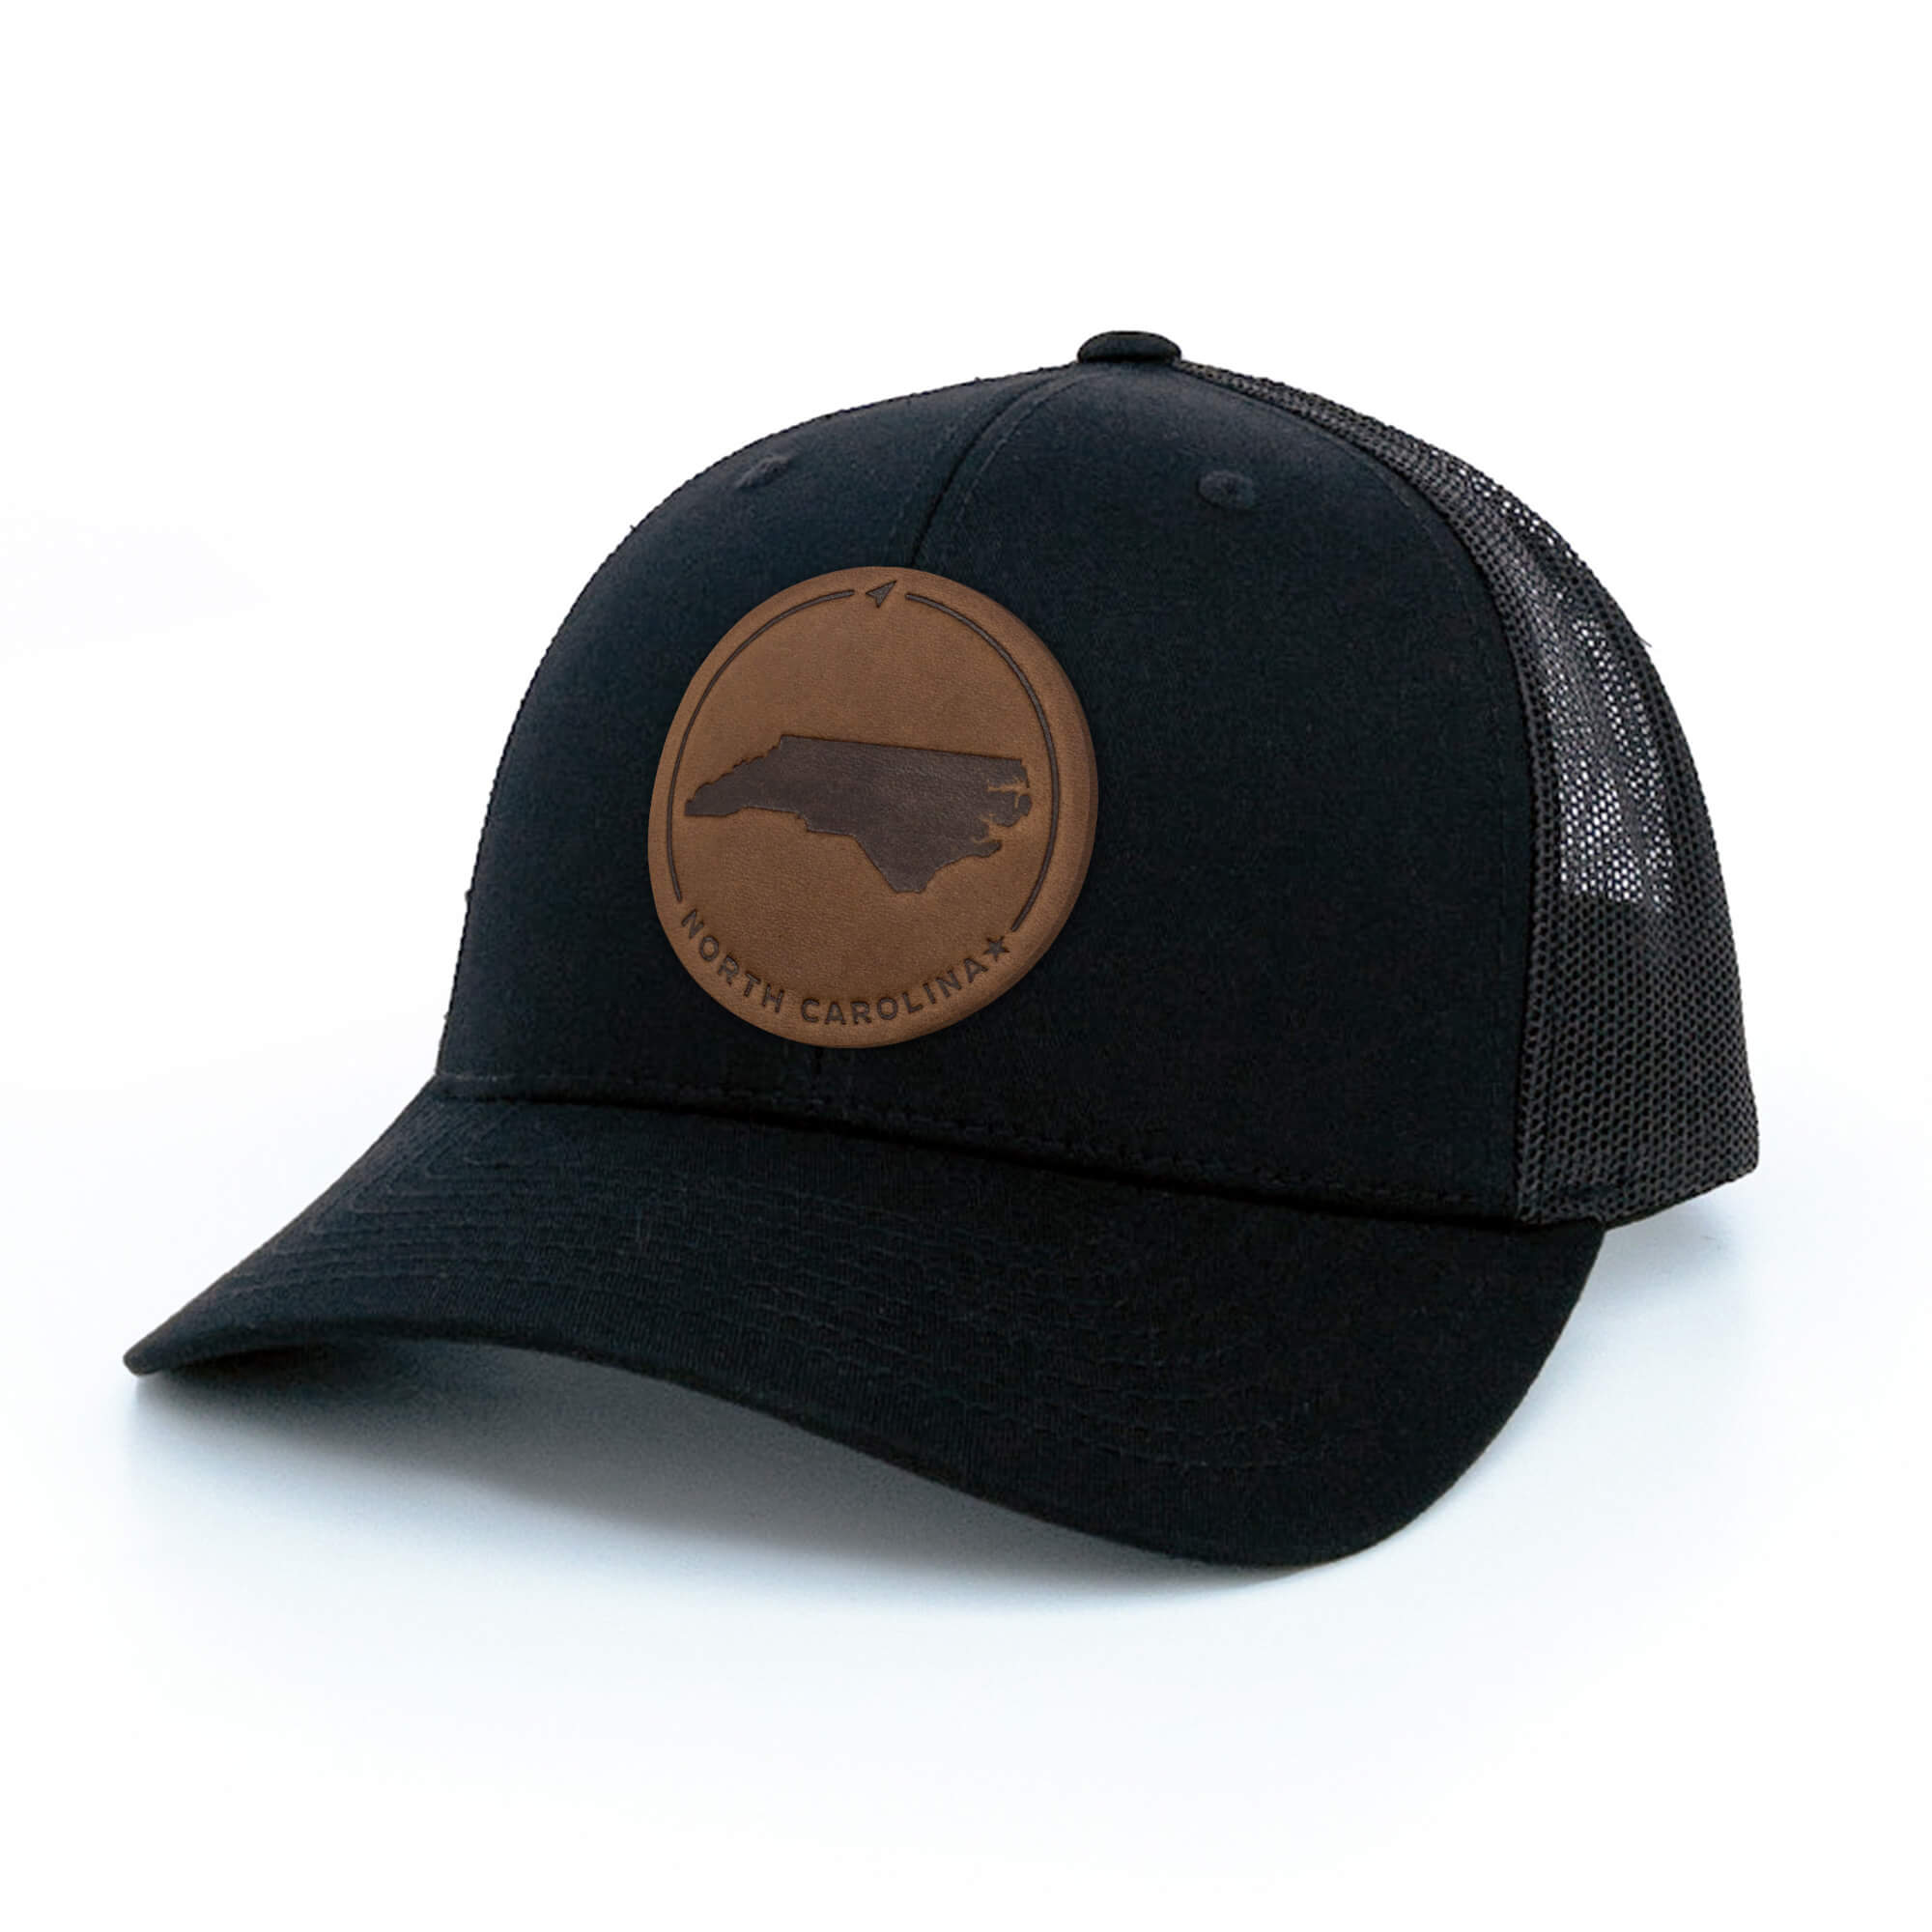 Pennsylvania Leather Patch Hat, Heather Grey - USA Trucker Hat Made with Full-Grain Leather, Water-Resistant Leather Patch